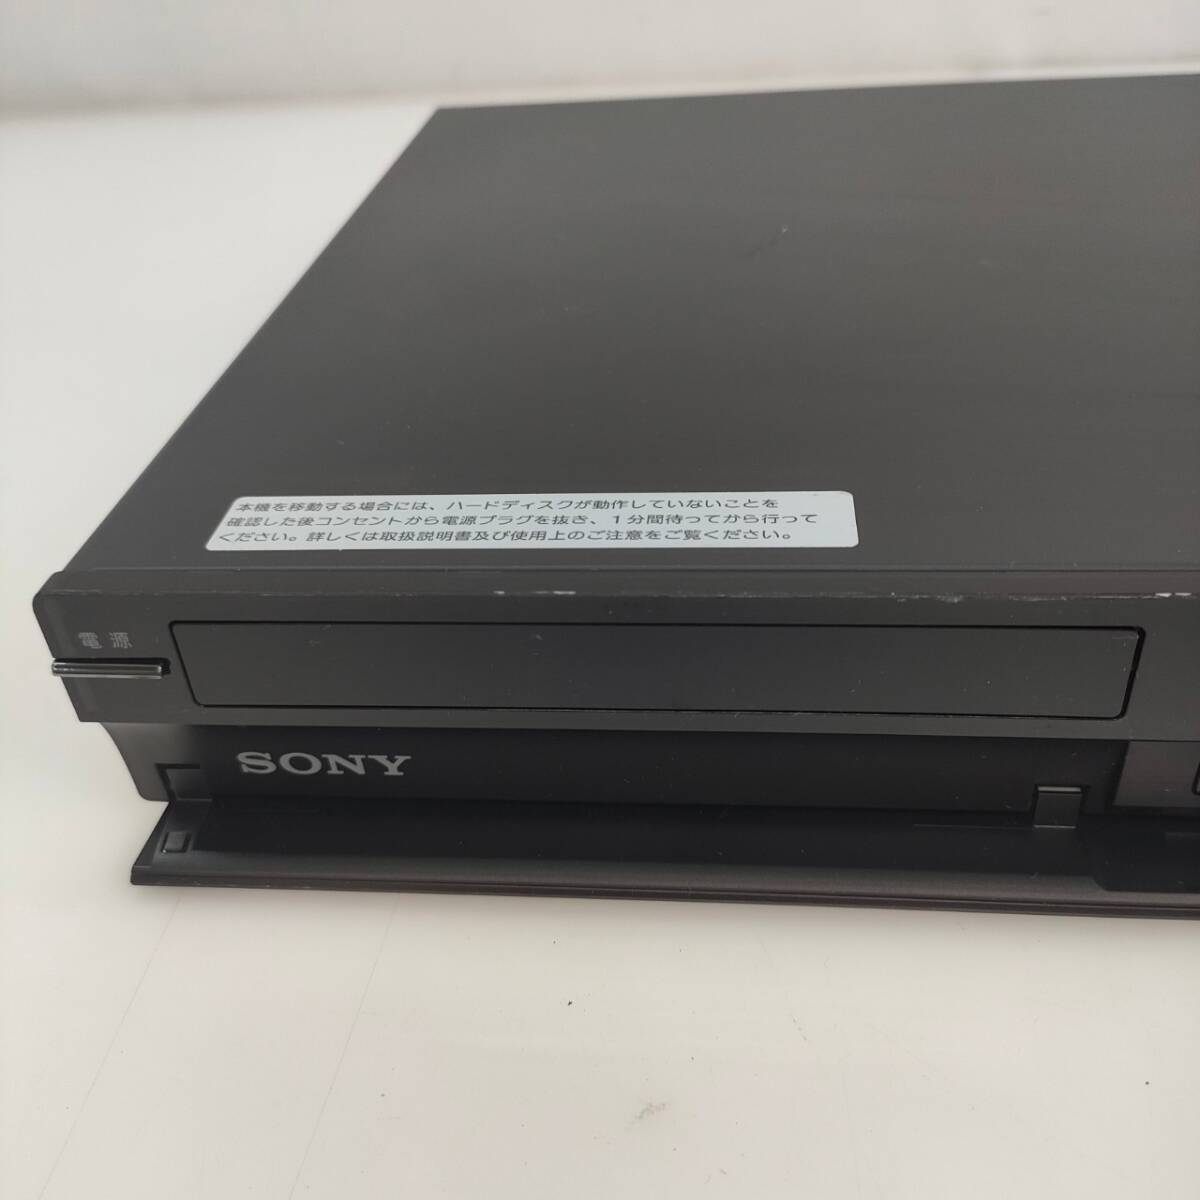 No.5174*1 jpy ~[SONY] Sony BDZ-AT700 Blue-ray disk recorder 2010 year made DVD HDD operation verification settled junk 